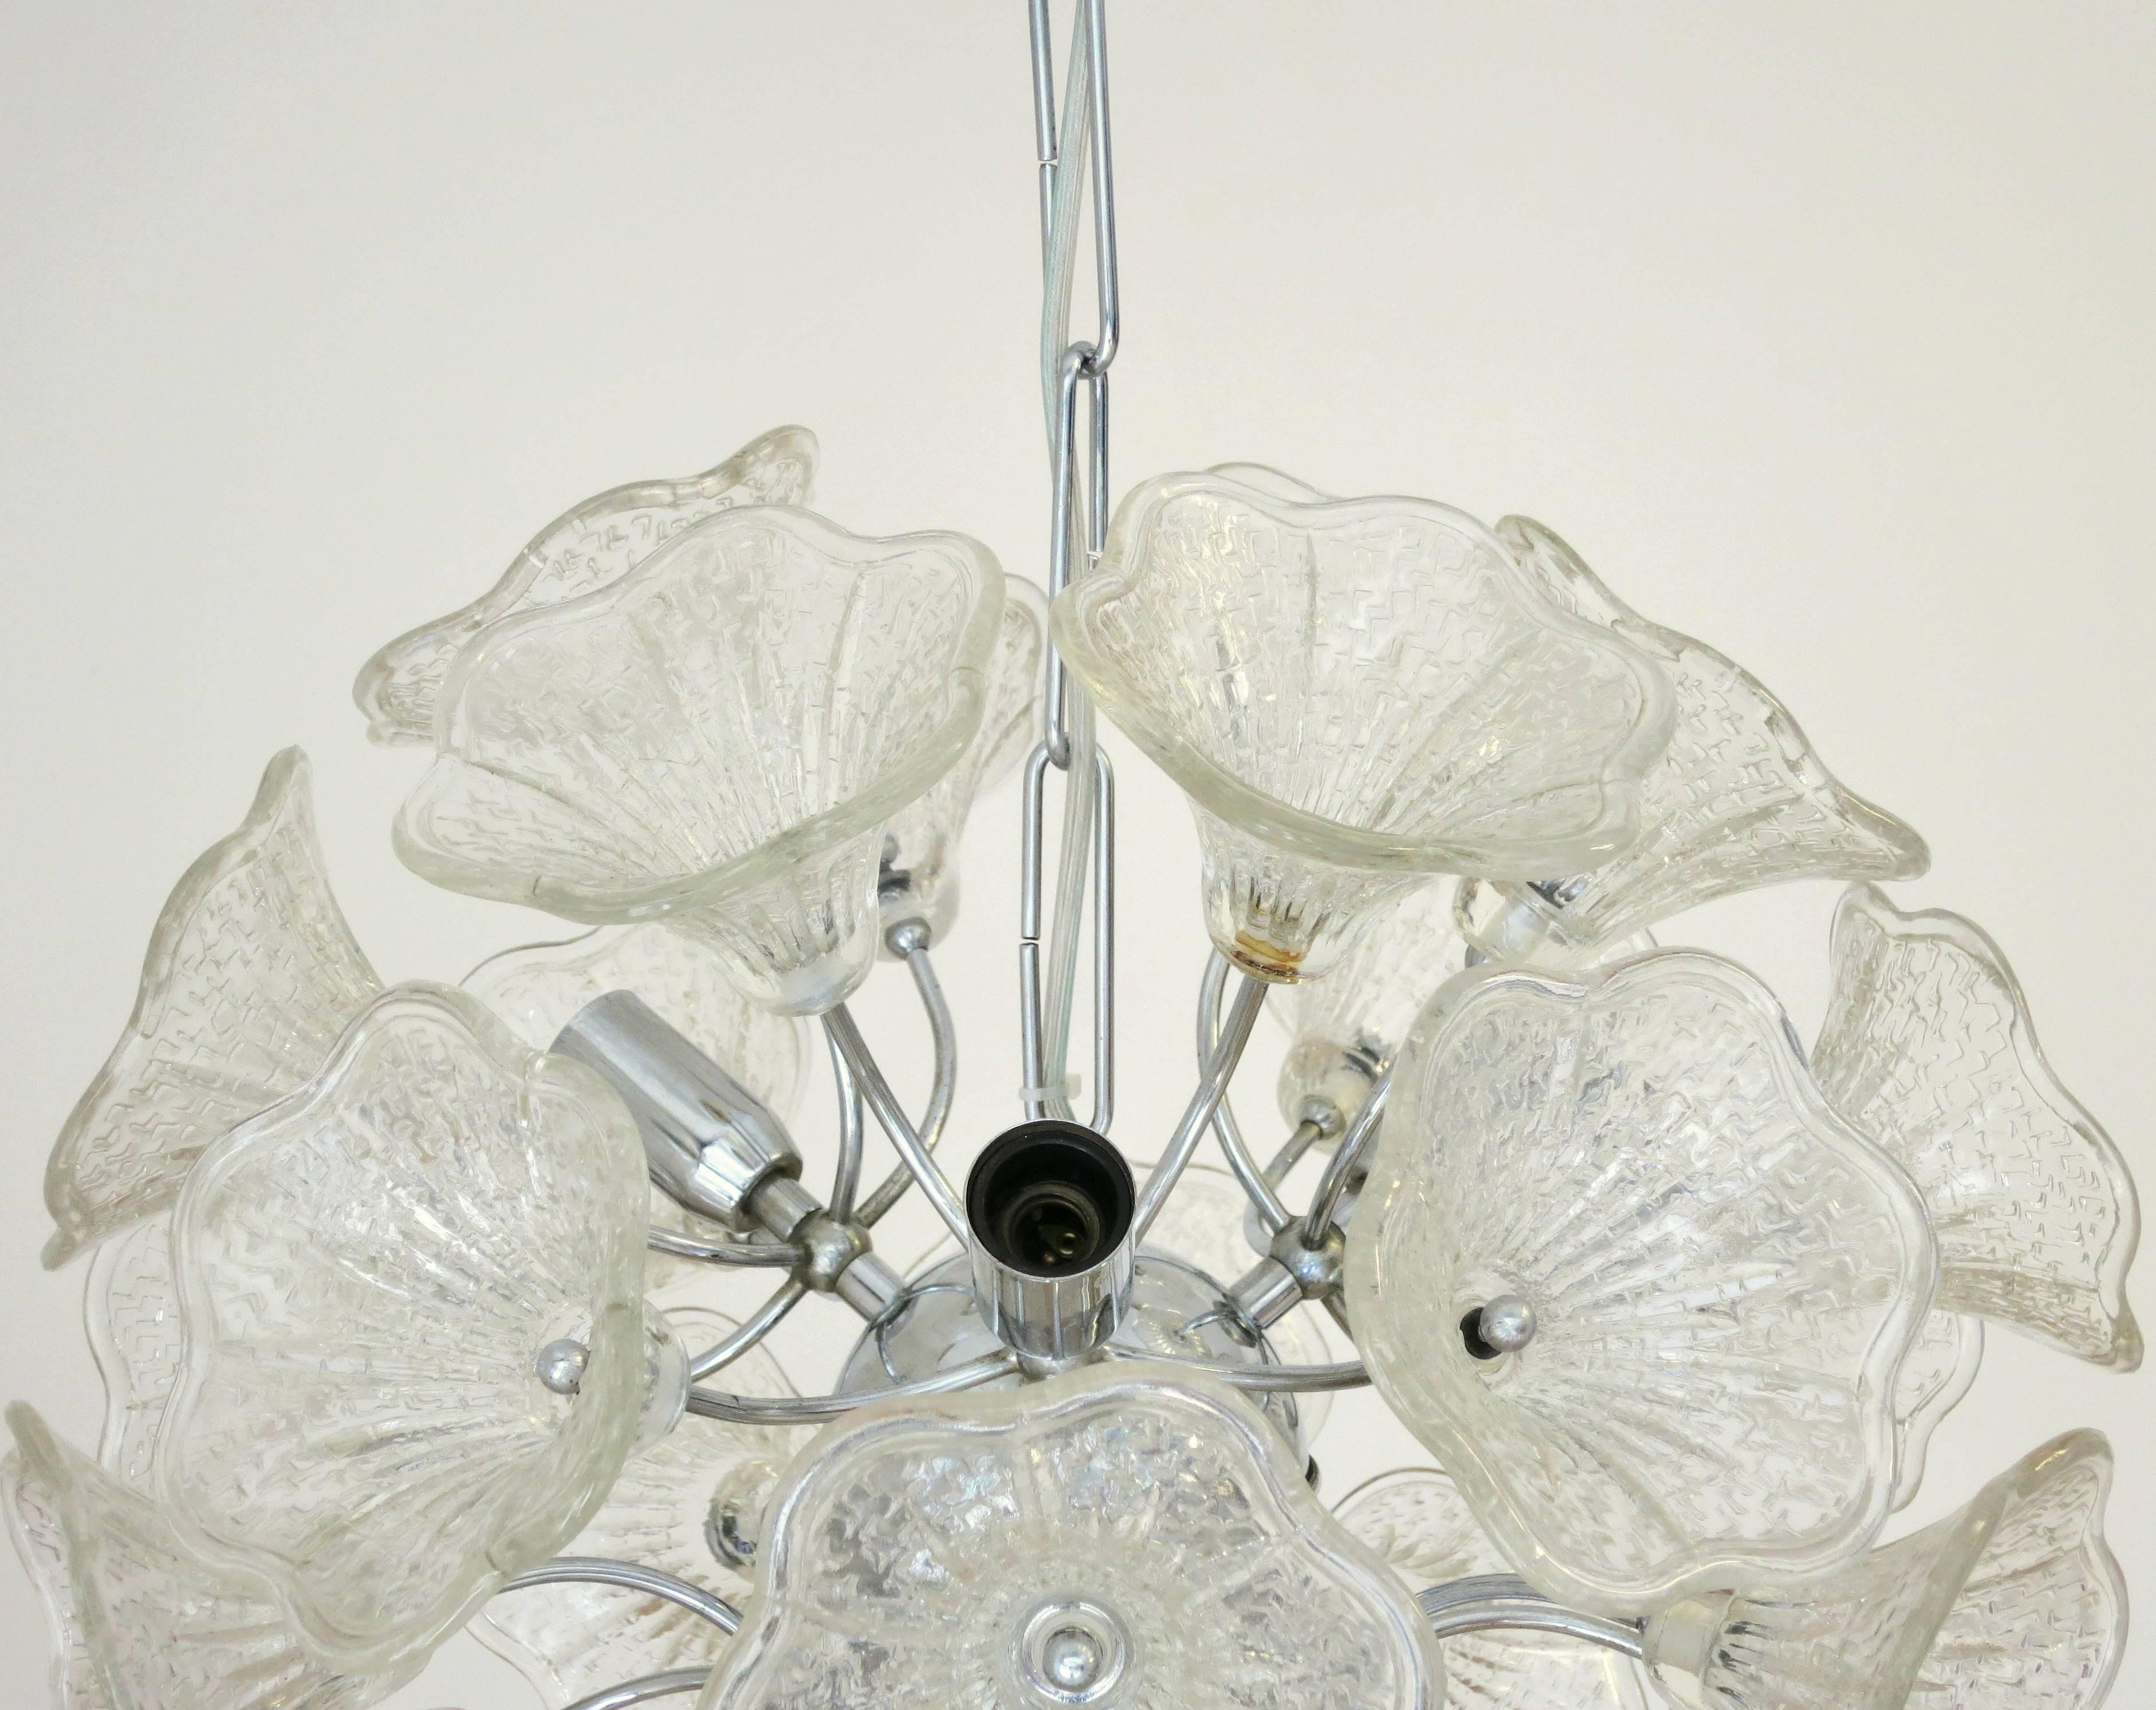 Vintage Italian chandelier Sputnik with clear Murano flowers on chrome frame, by Venini. / Made in Italy in the 1960's
6 lights / max 40W each
Diameter: 20 inches / Height: 20 inches
1 in stock in Palm Springs currently ON SALE for $2,999!!!
Order